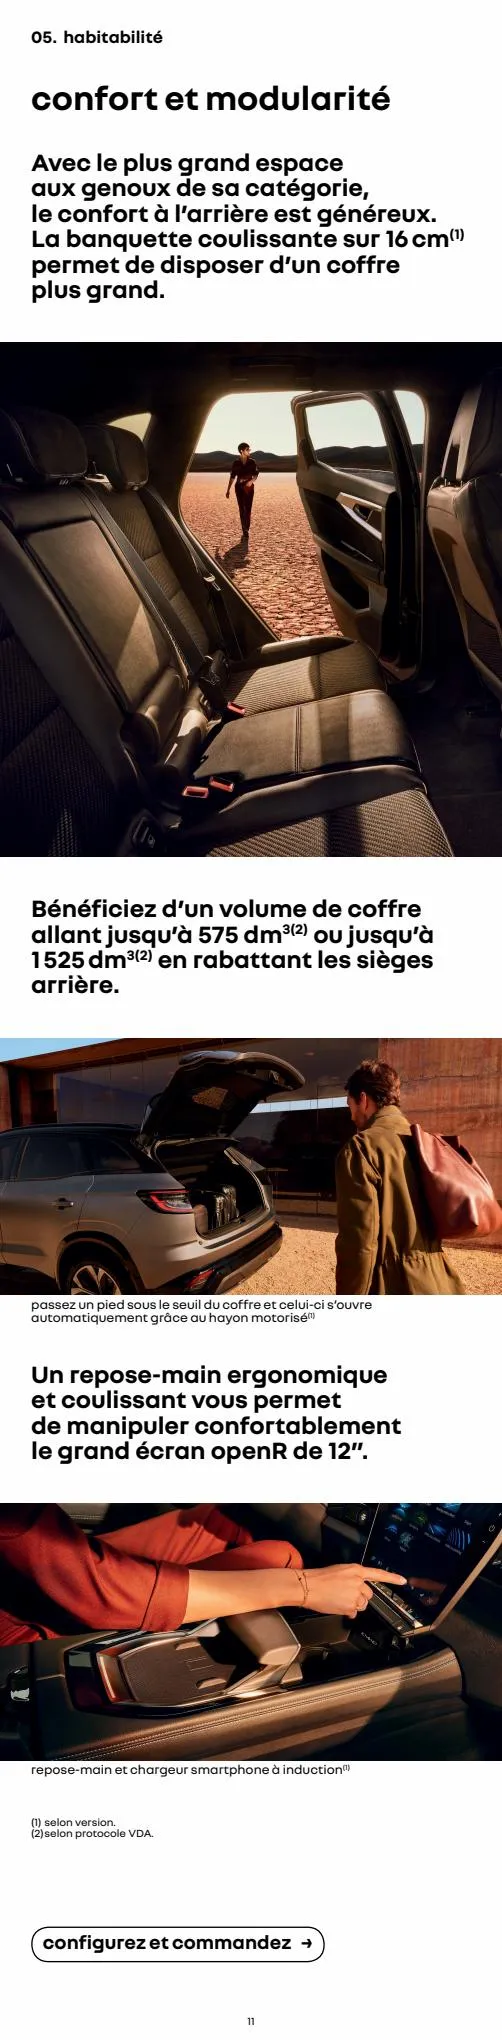 Catalogue Renault Austral E-Tech Full Hybrid, page 00011